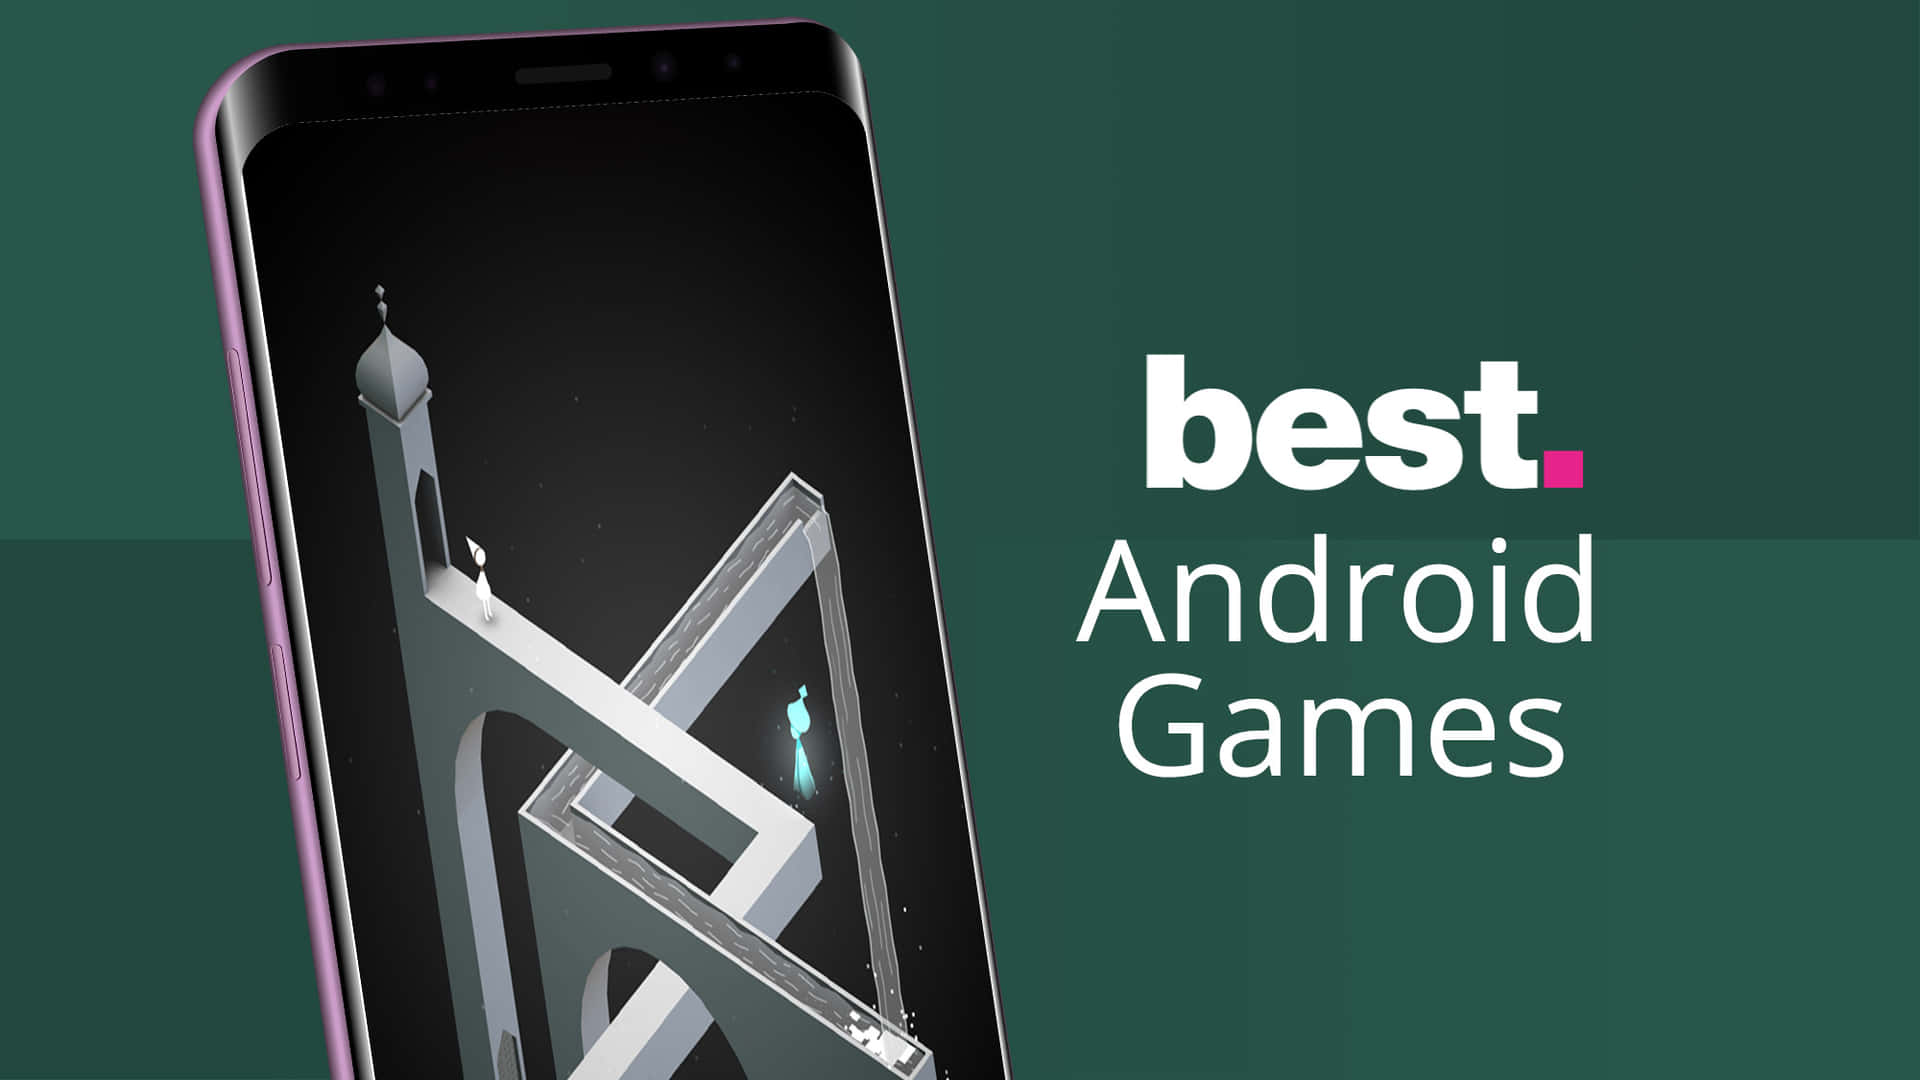 Stay organized on the go with the award-winning Android OS.